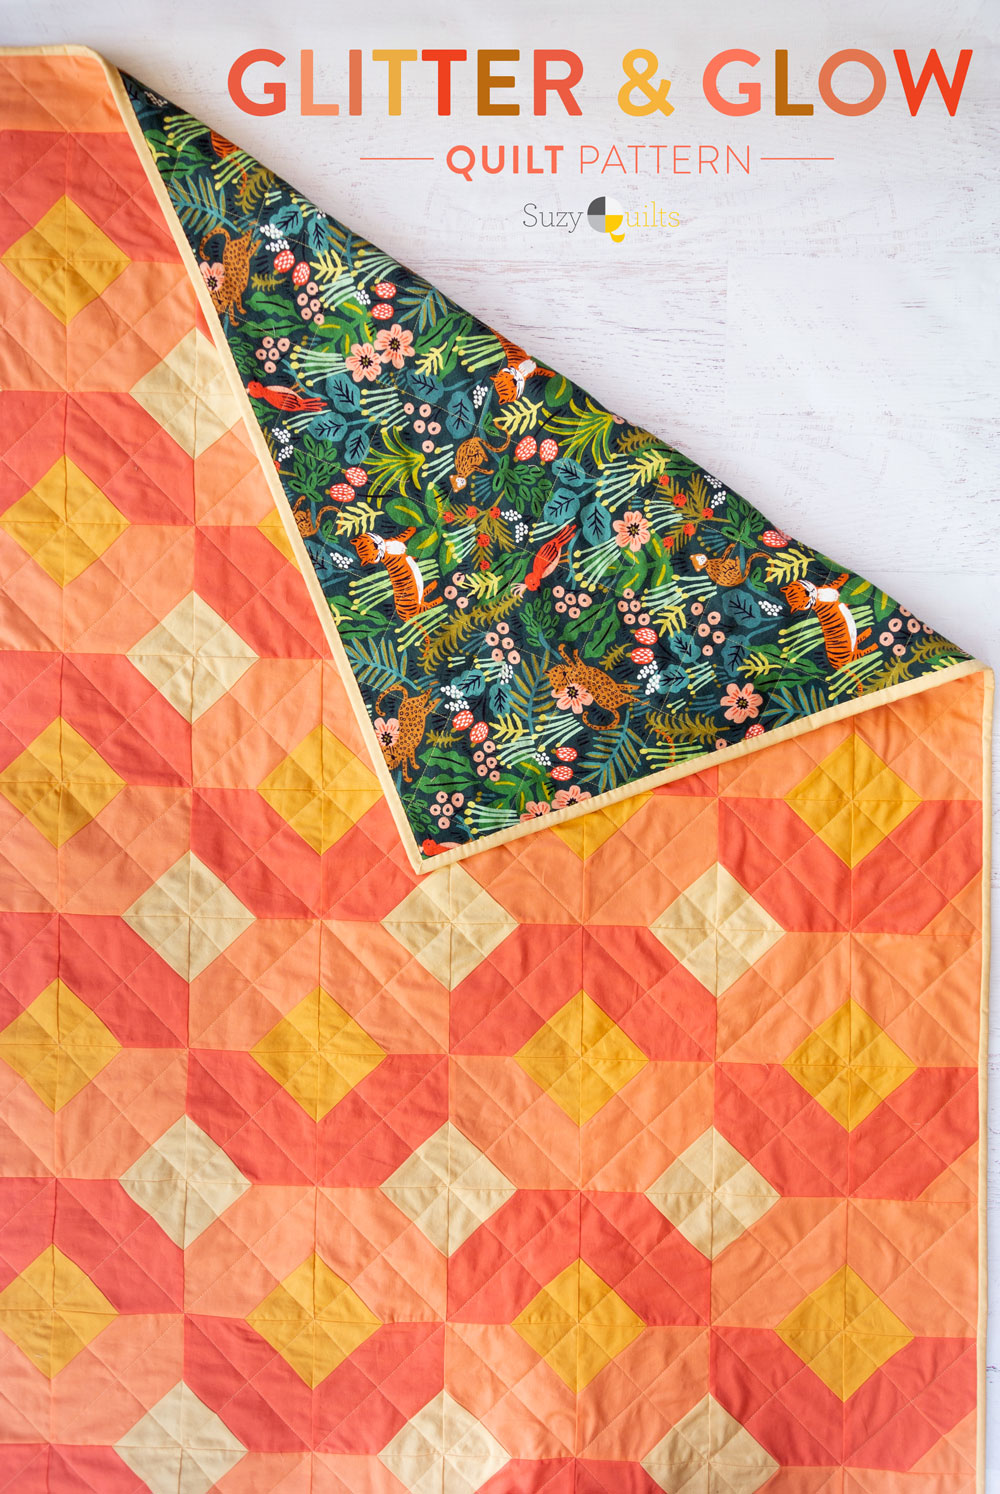 The Glitter and Glow quilt pattern is fun and versatile. Use yardage, fat quarters, or scraps you have in your stash!